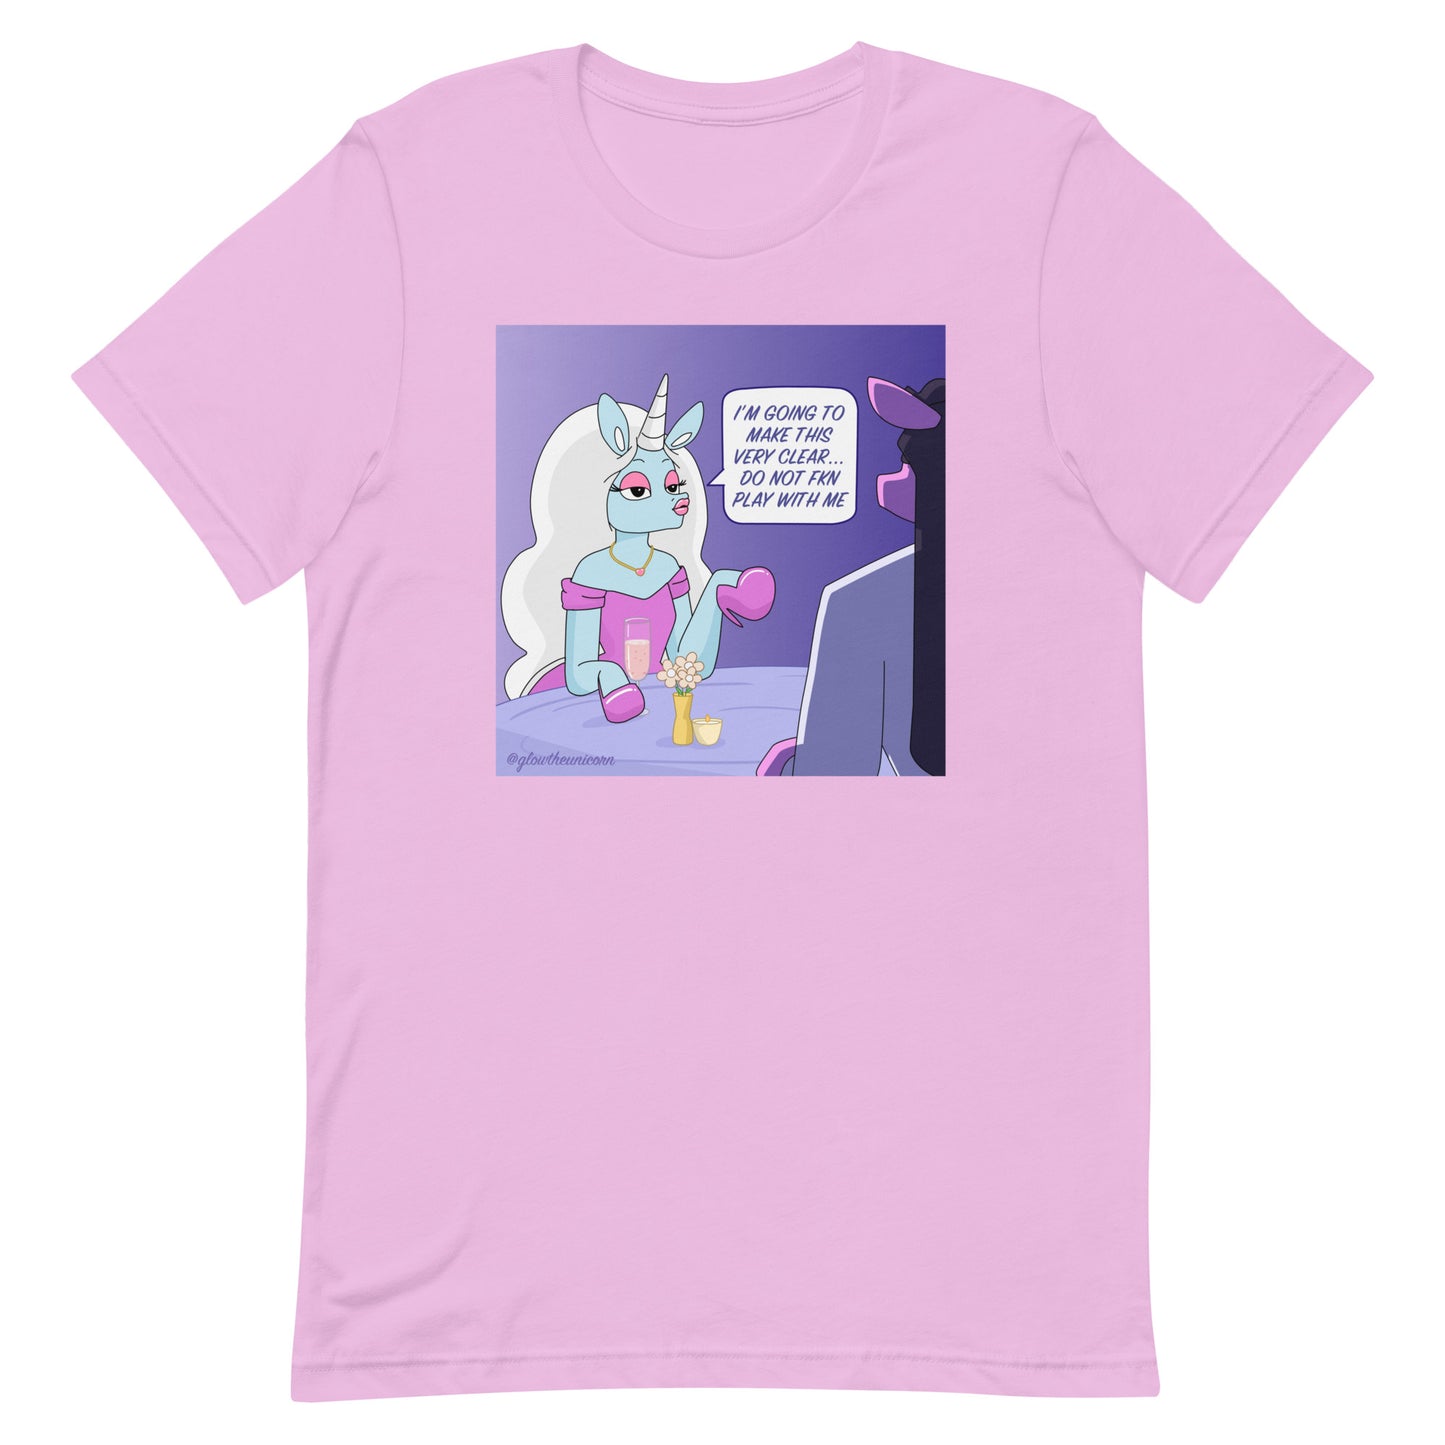 do not play with me tee in lilac